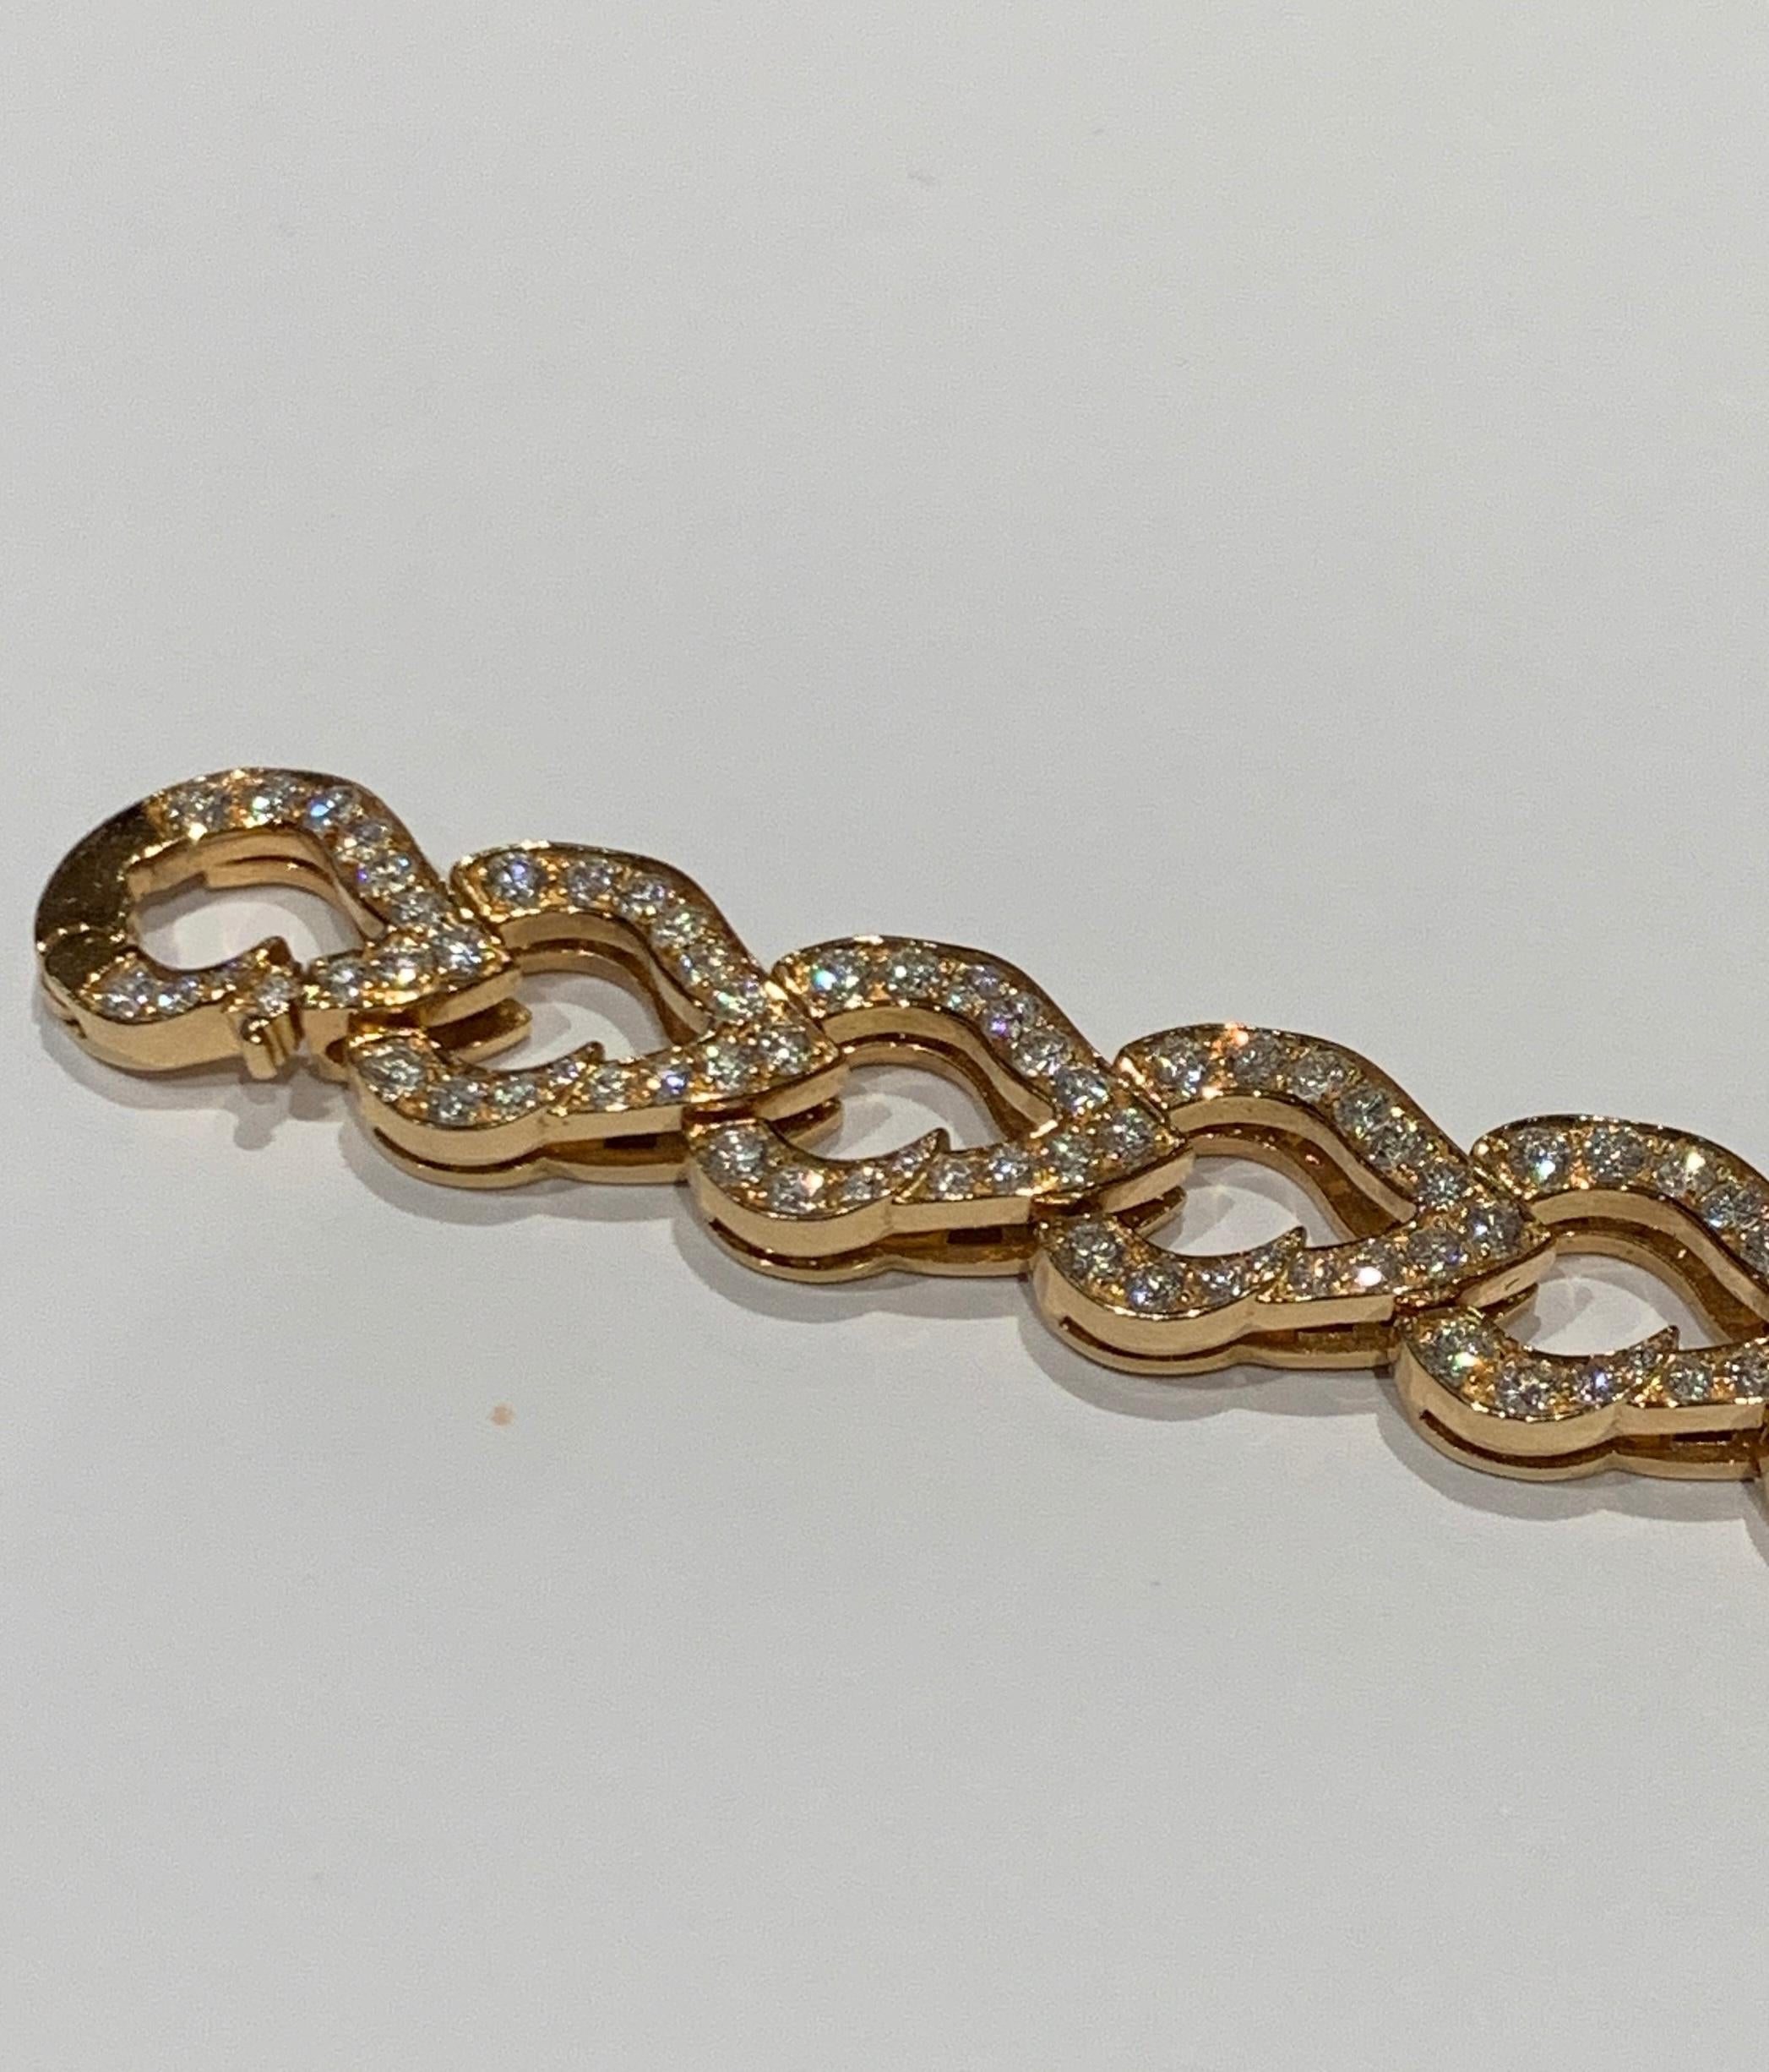 An elegant and timeless chain created from interlocked Kashmir design drops set with brilliant cut diamonds, delicately encircles the wrist.
The clasp is made invisible. This work of precision makes the bracelet unique.
Once worn, it will look like